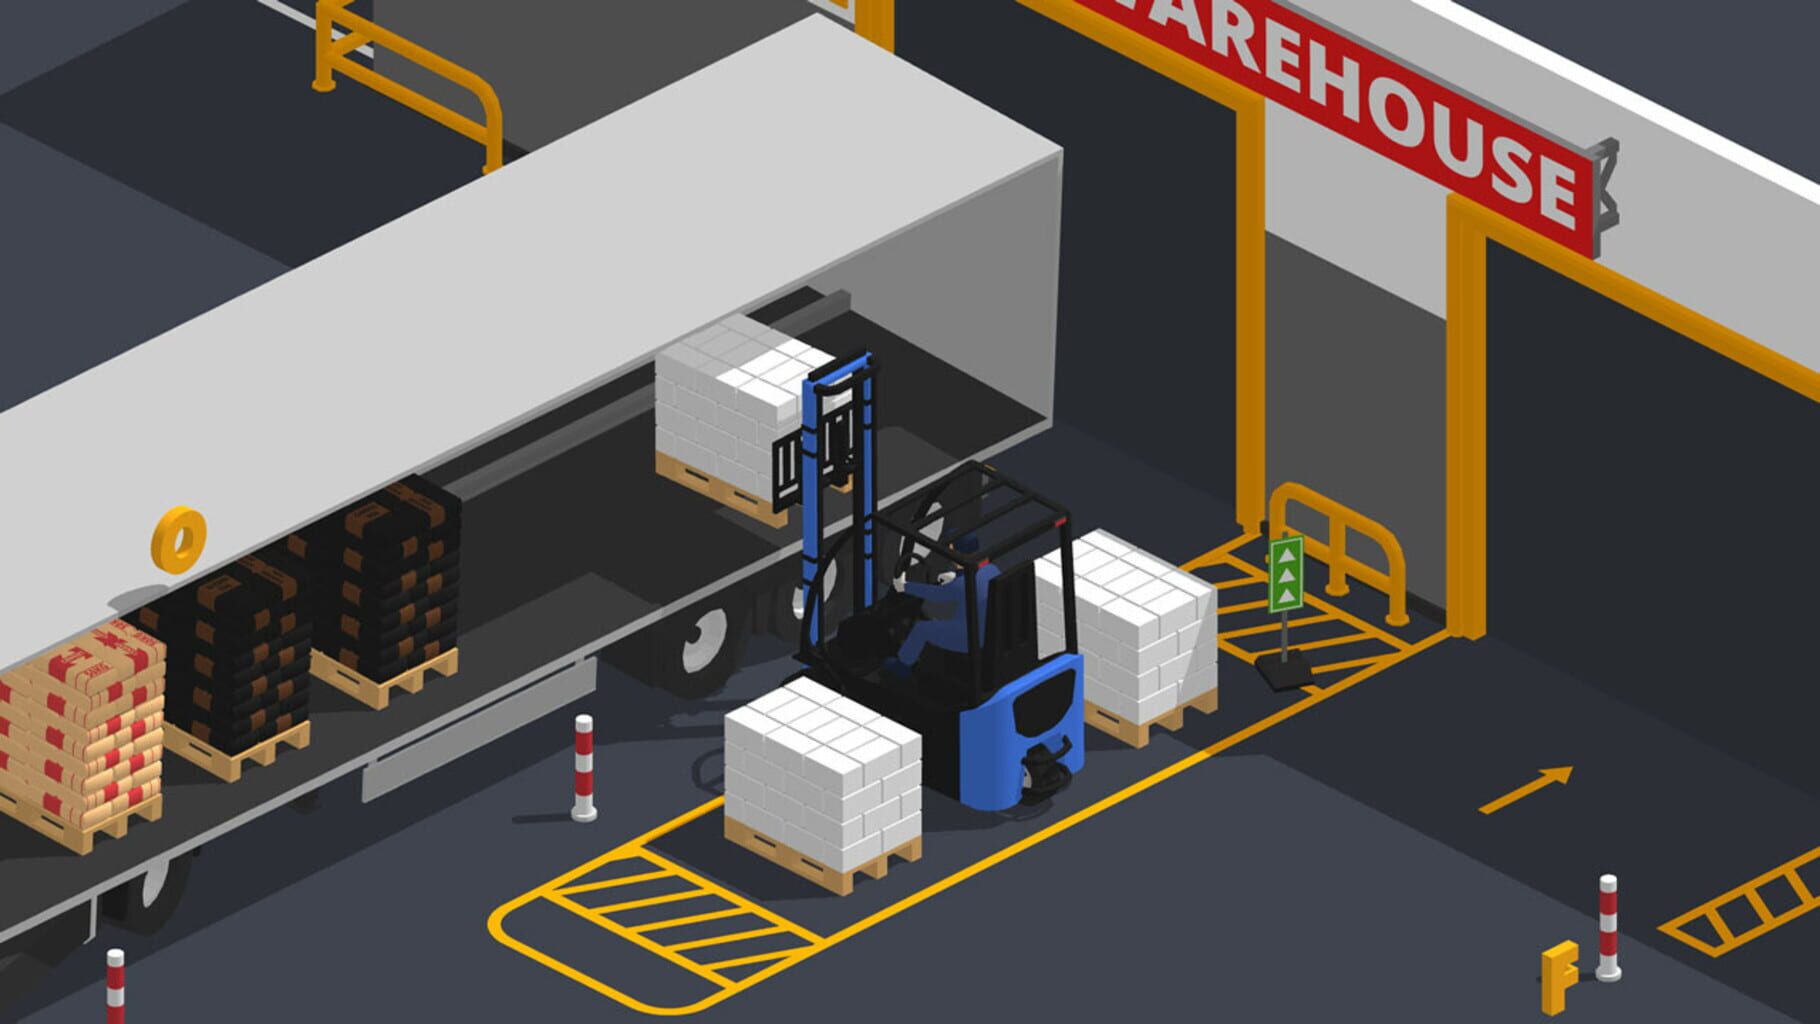 Forklift Extreme: Deluxe Edition screenshot